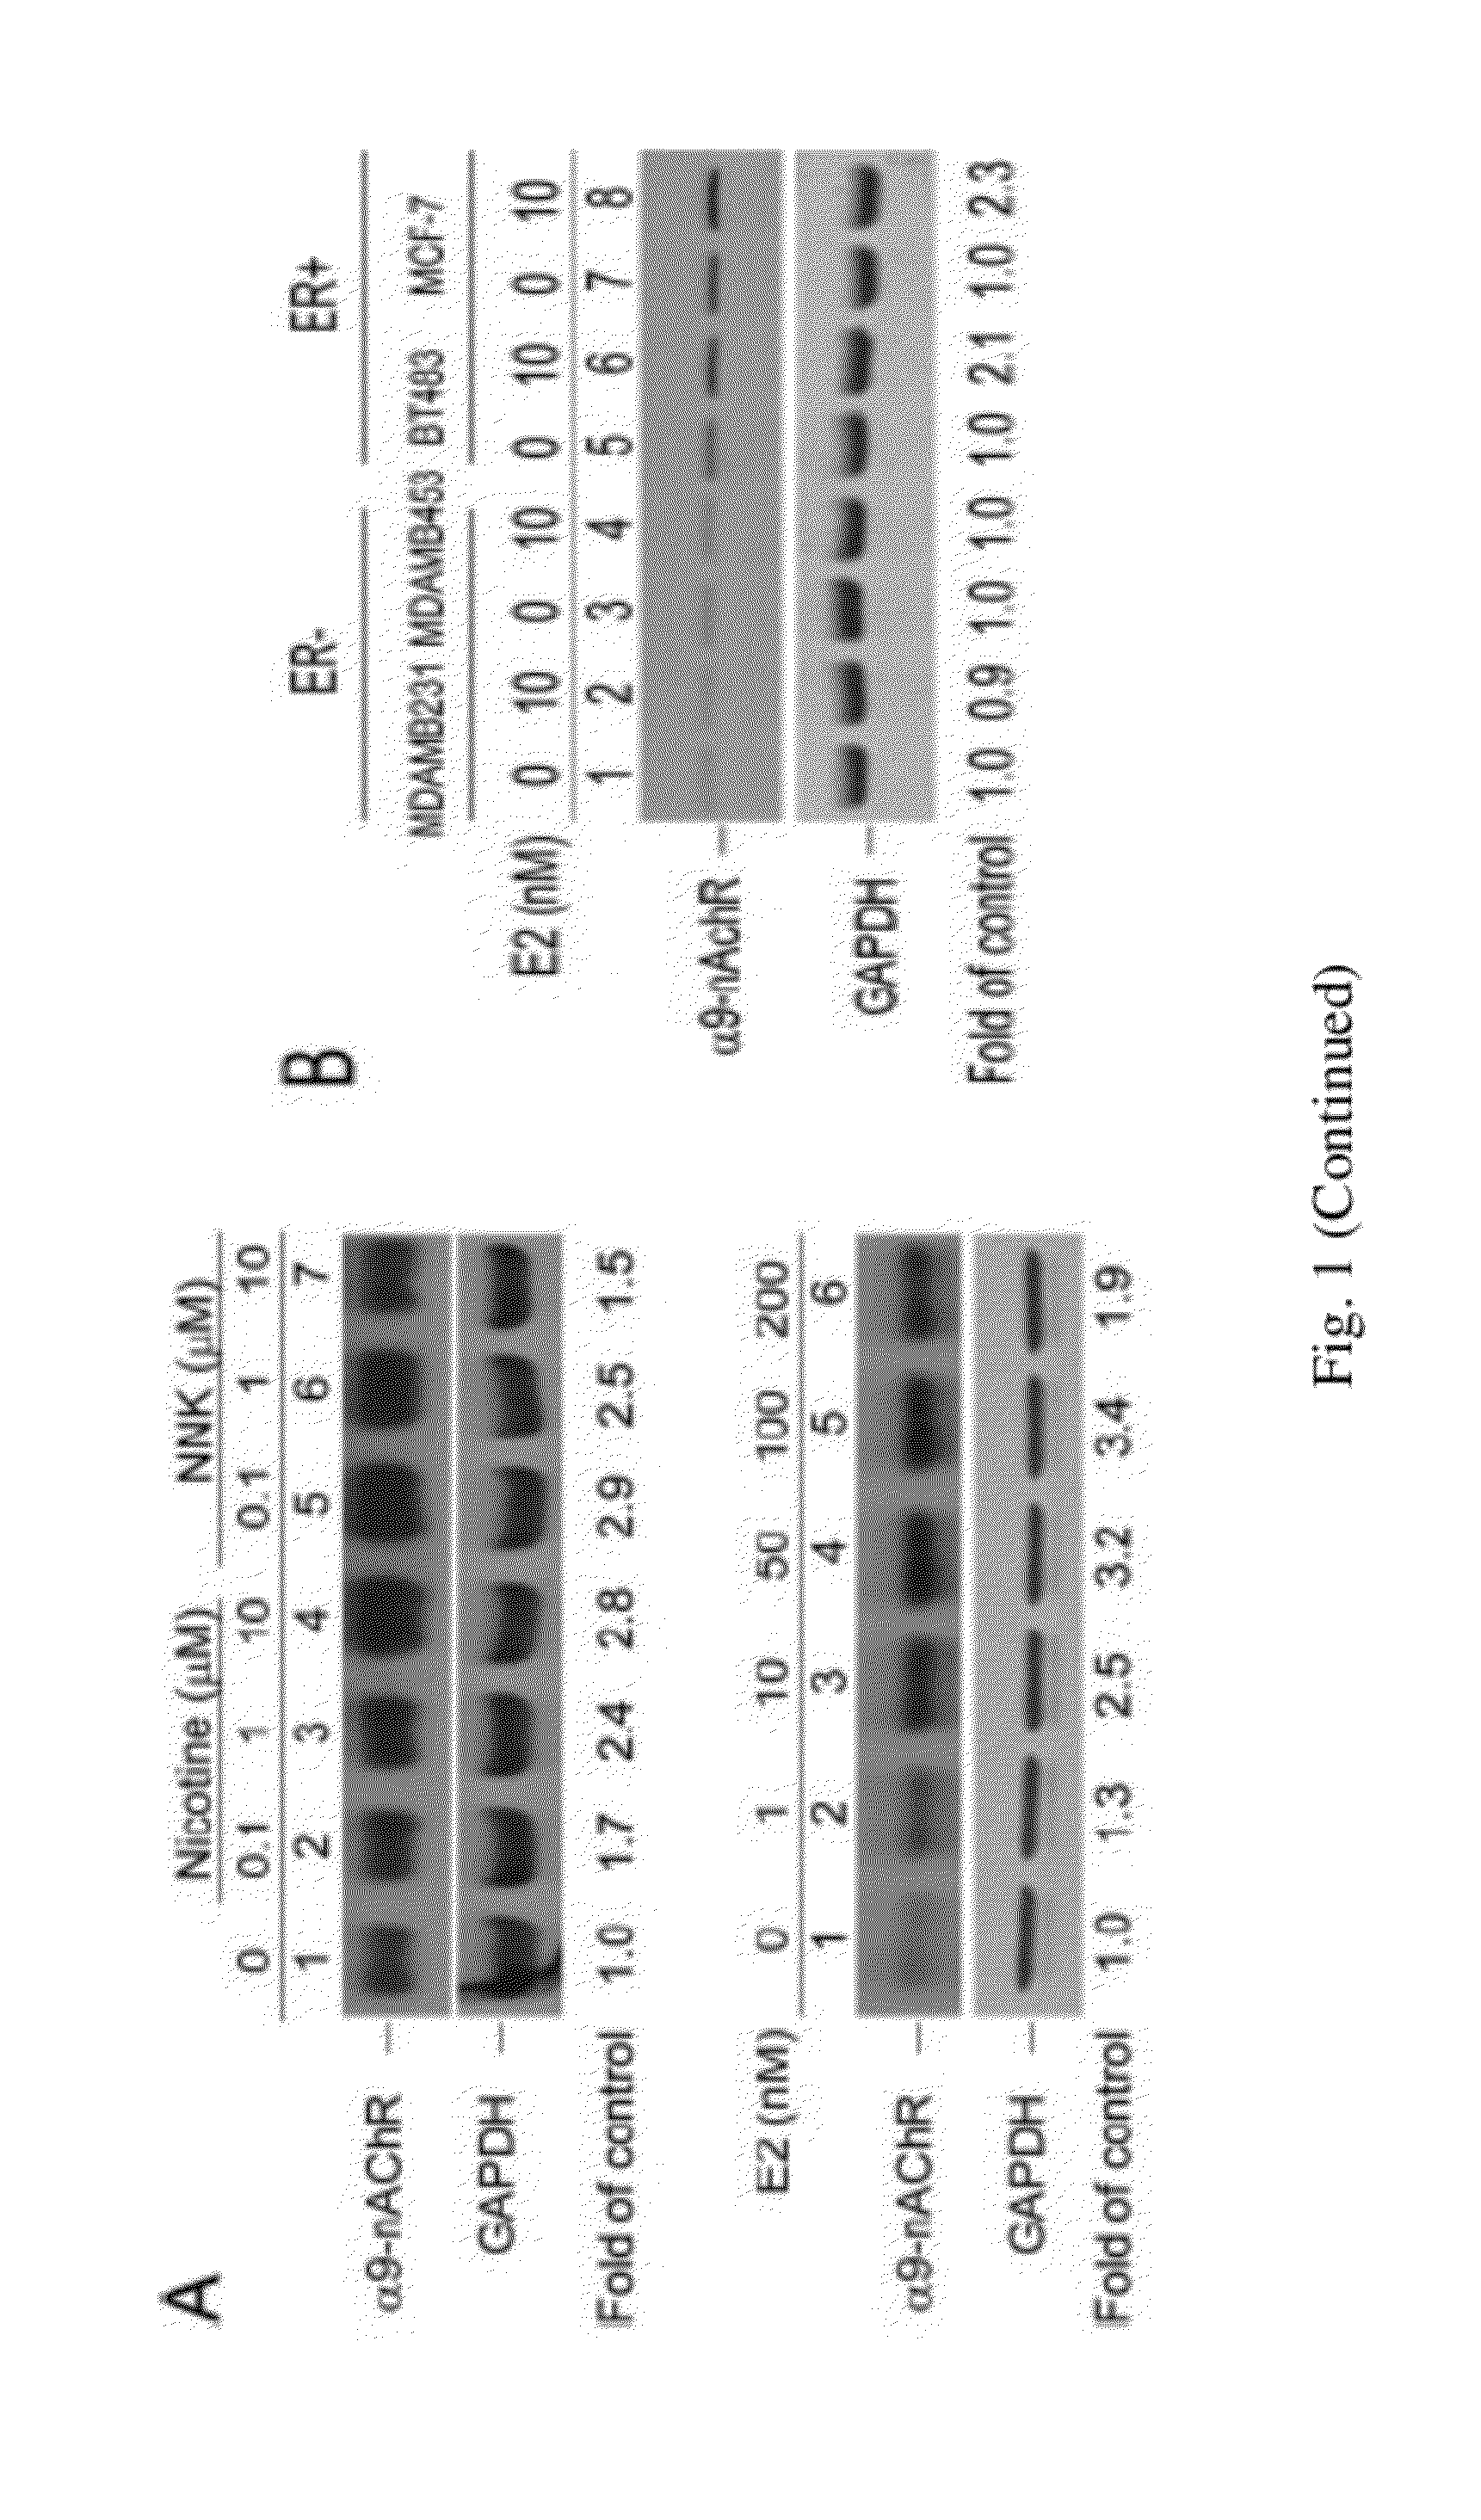 Tea polyphenols products for ceasing smoking and treating and/or preventing nicotine or nicotine-derived compounds or estrogen induced breast cancer